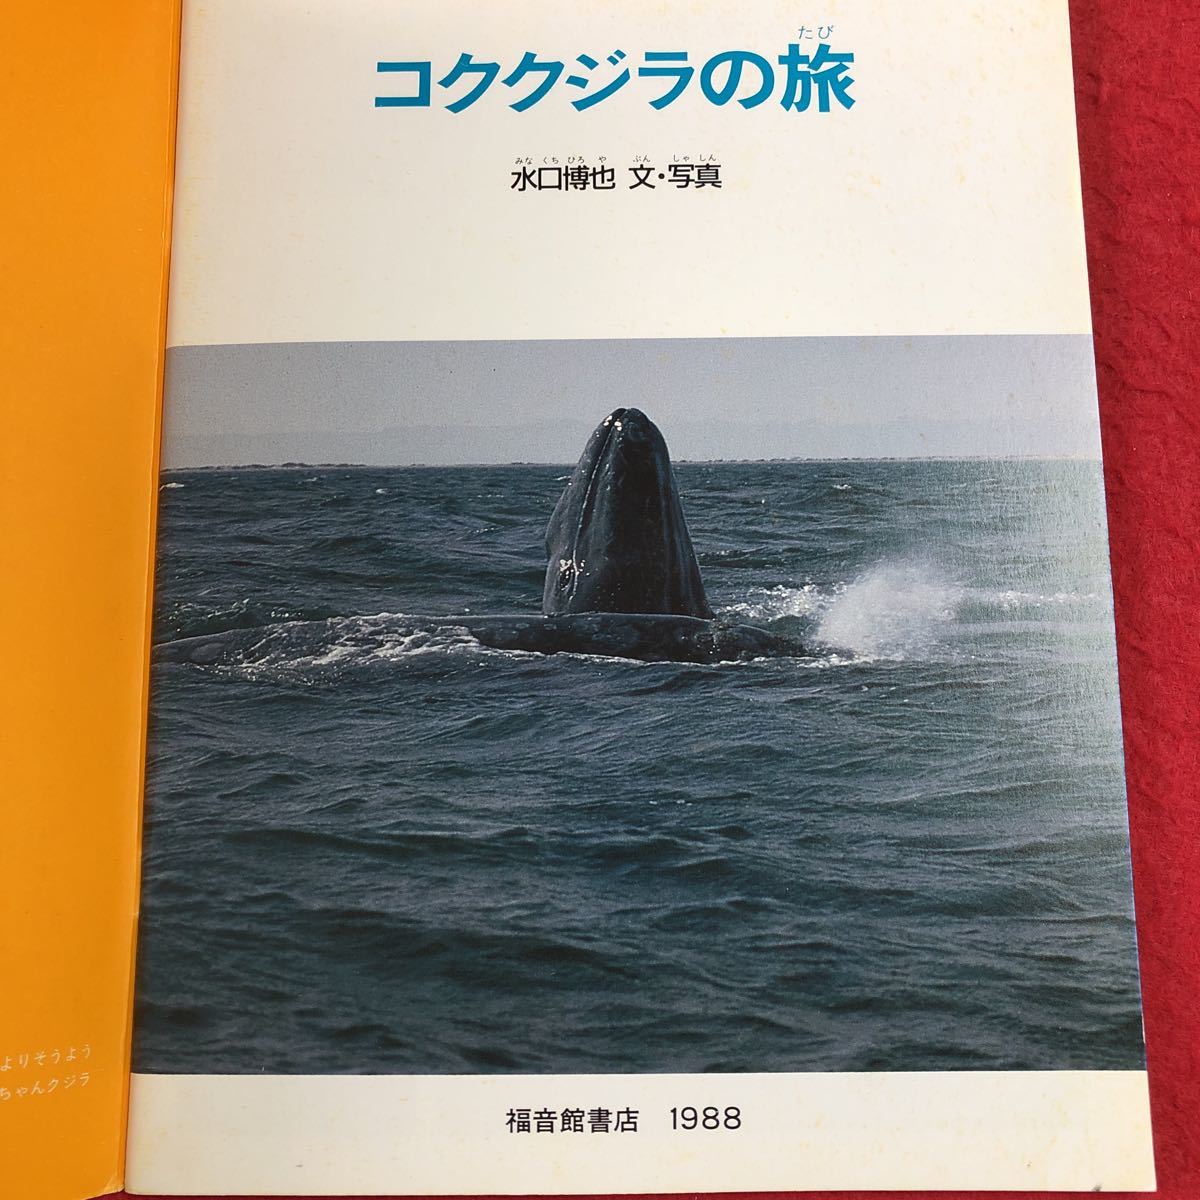 S6f-131kok whale. . monthly many. ... through volume 40 number 1988 year 7 month 1 day issue luck sound pavilion bookstore picture book study photograph whale mammalian observation Alaska history 